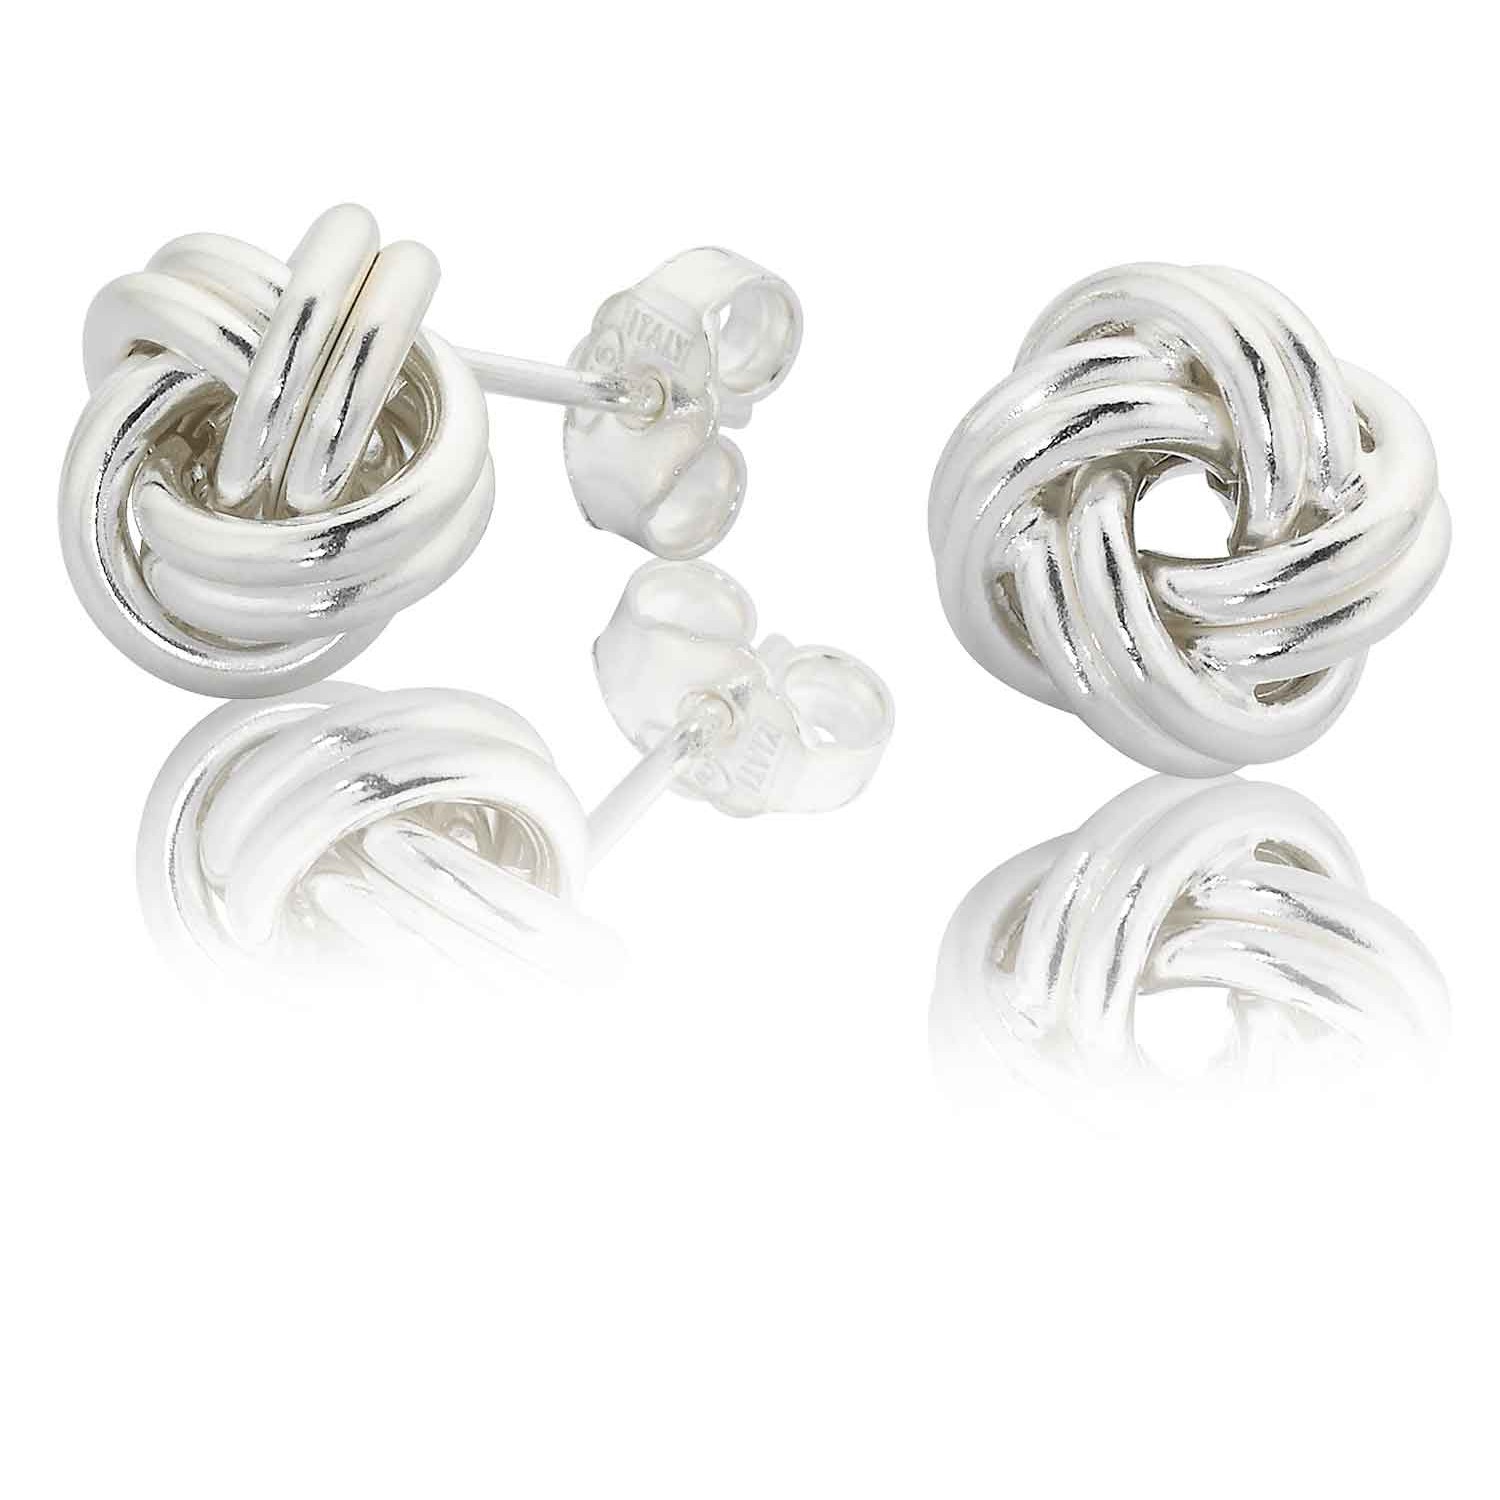 Sterling Silver Knot Stud Earrings. The very popular wool knot stud earrings. Purchase 3 for a discount and free shipping3 Months No Payments and Interest for Q Card holders Oxipay is simply the easier way to pay - use Oxipay and well spread your payment 